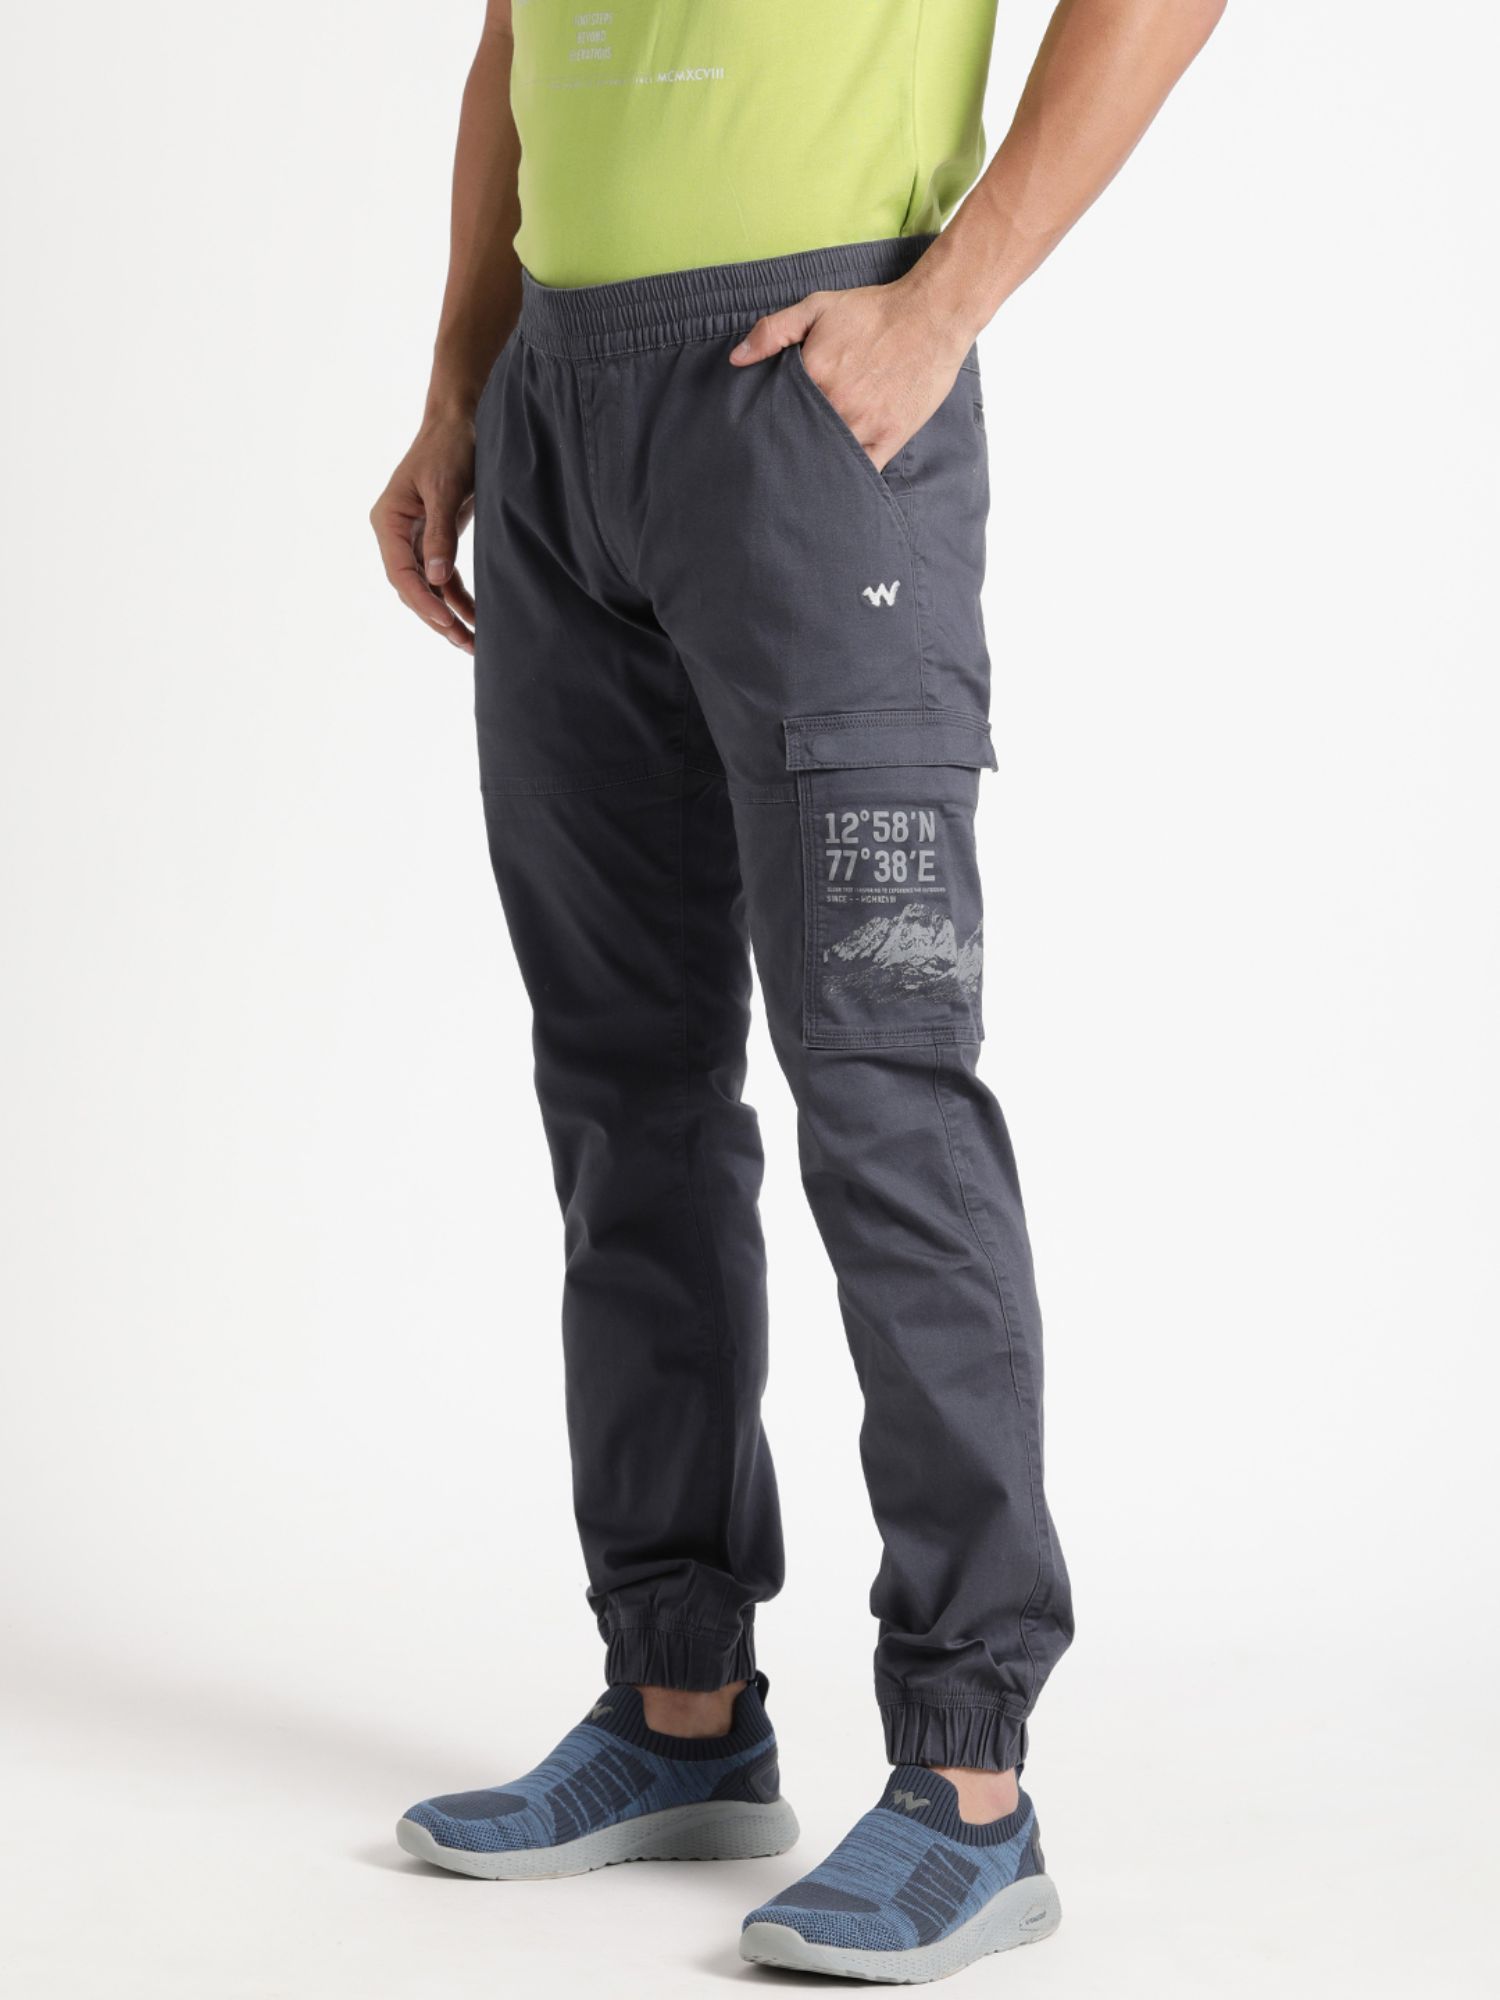 WILDCRAFT Men Convertible Pants LNVIOV0OWC8 (Size - 2XL, Grey) in Mumbai at  best price by Wildcraft - Justdial